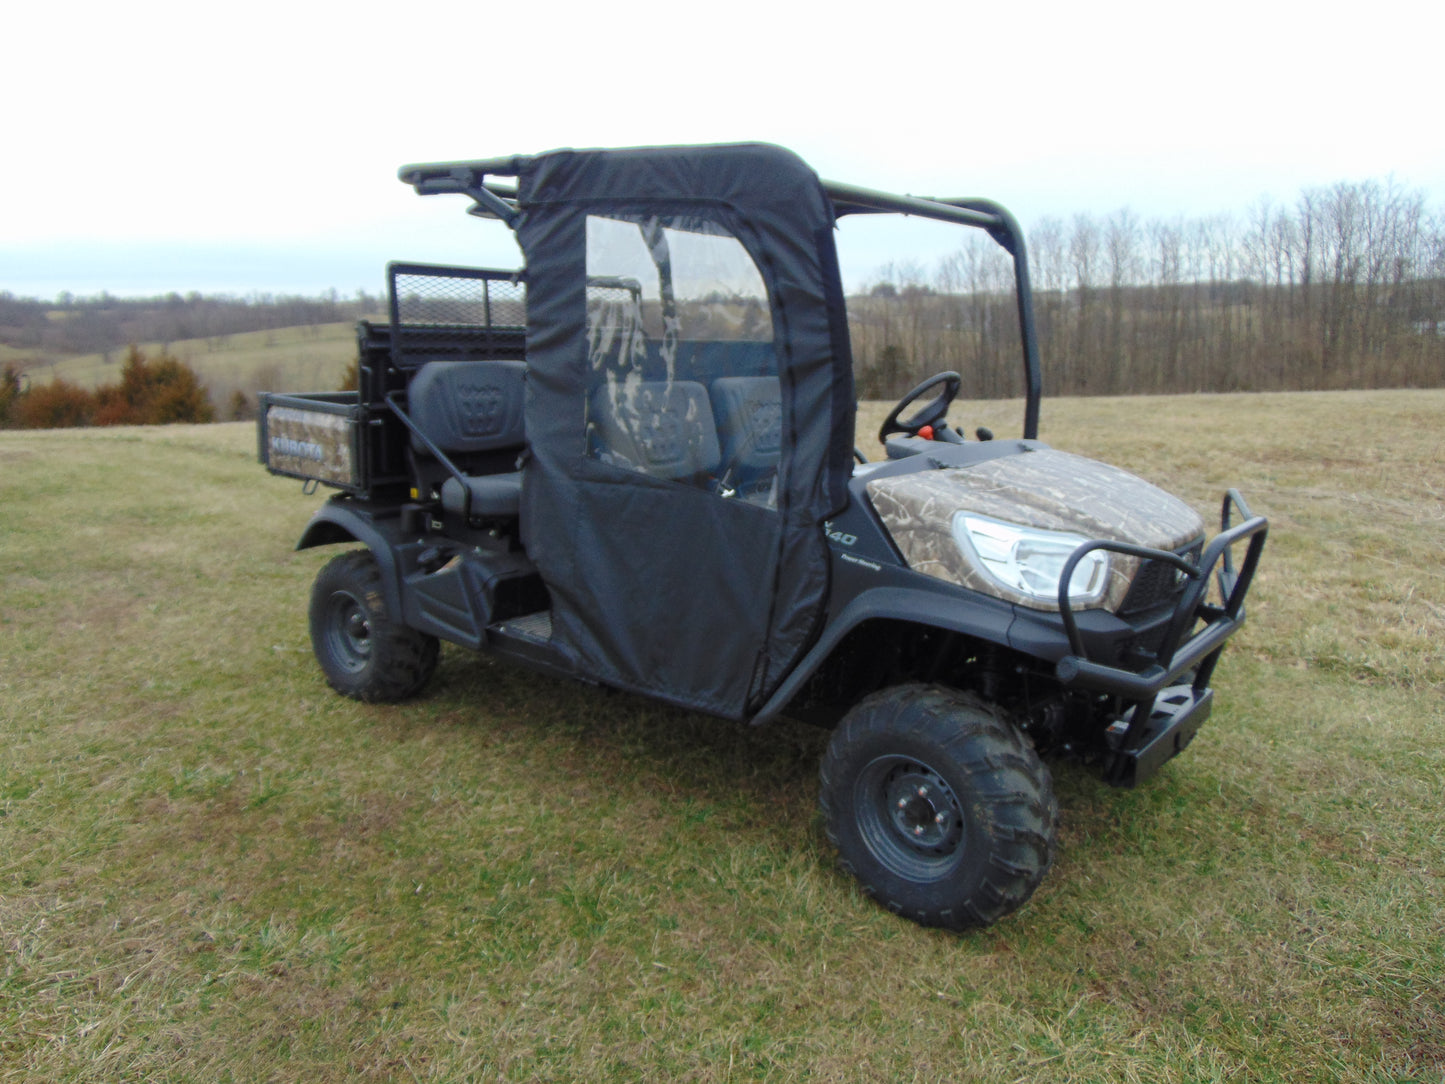 Kubota RTV X1140 - Front Door/Center Panel Combo (To Enclose Front Half Only)